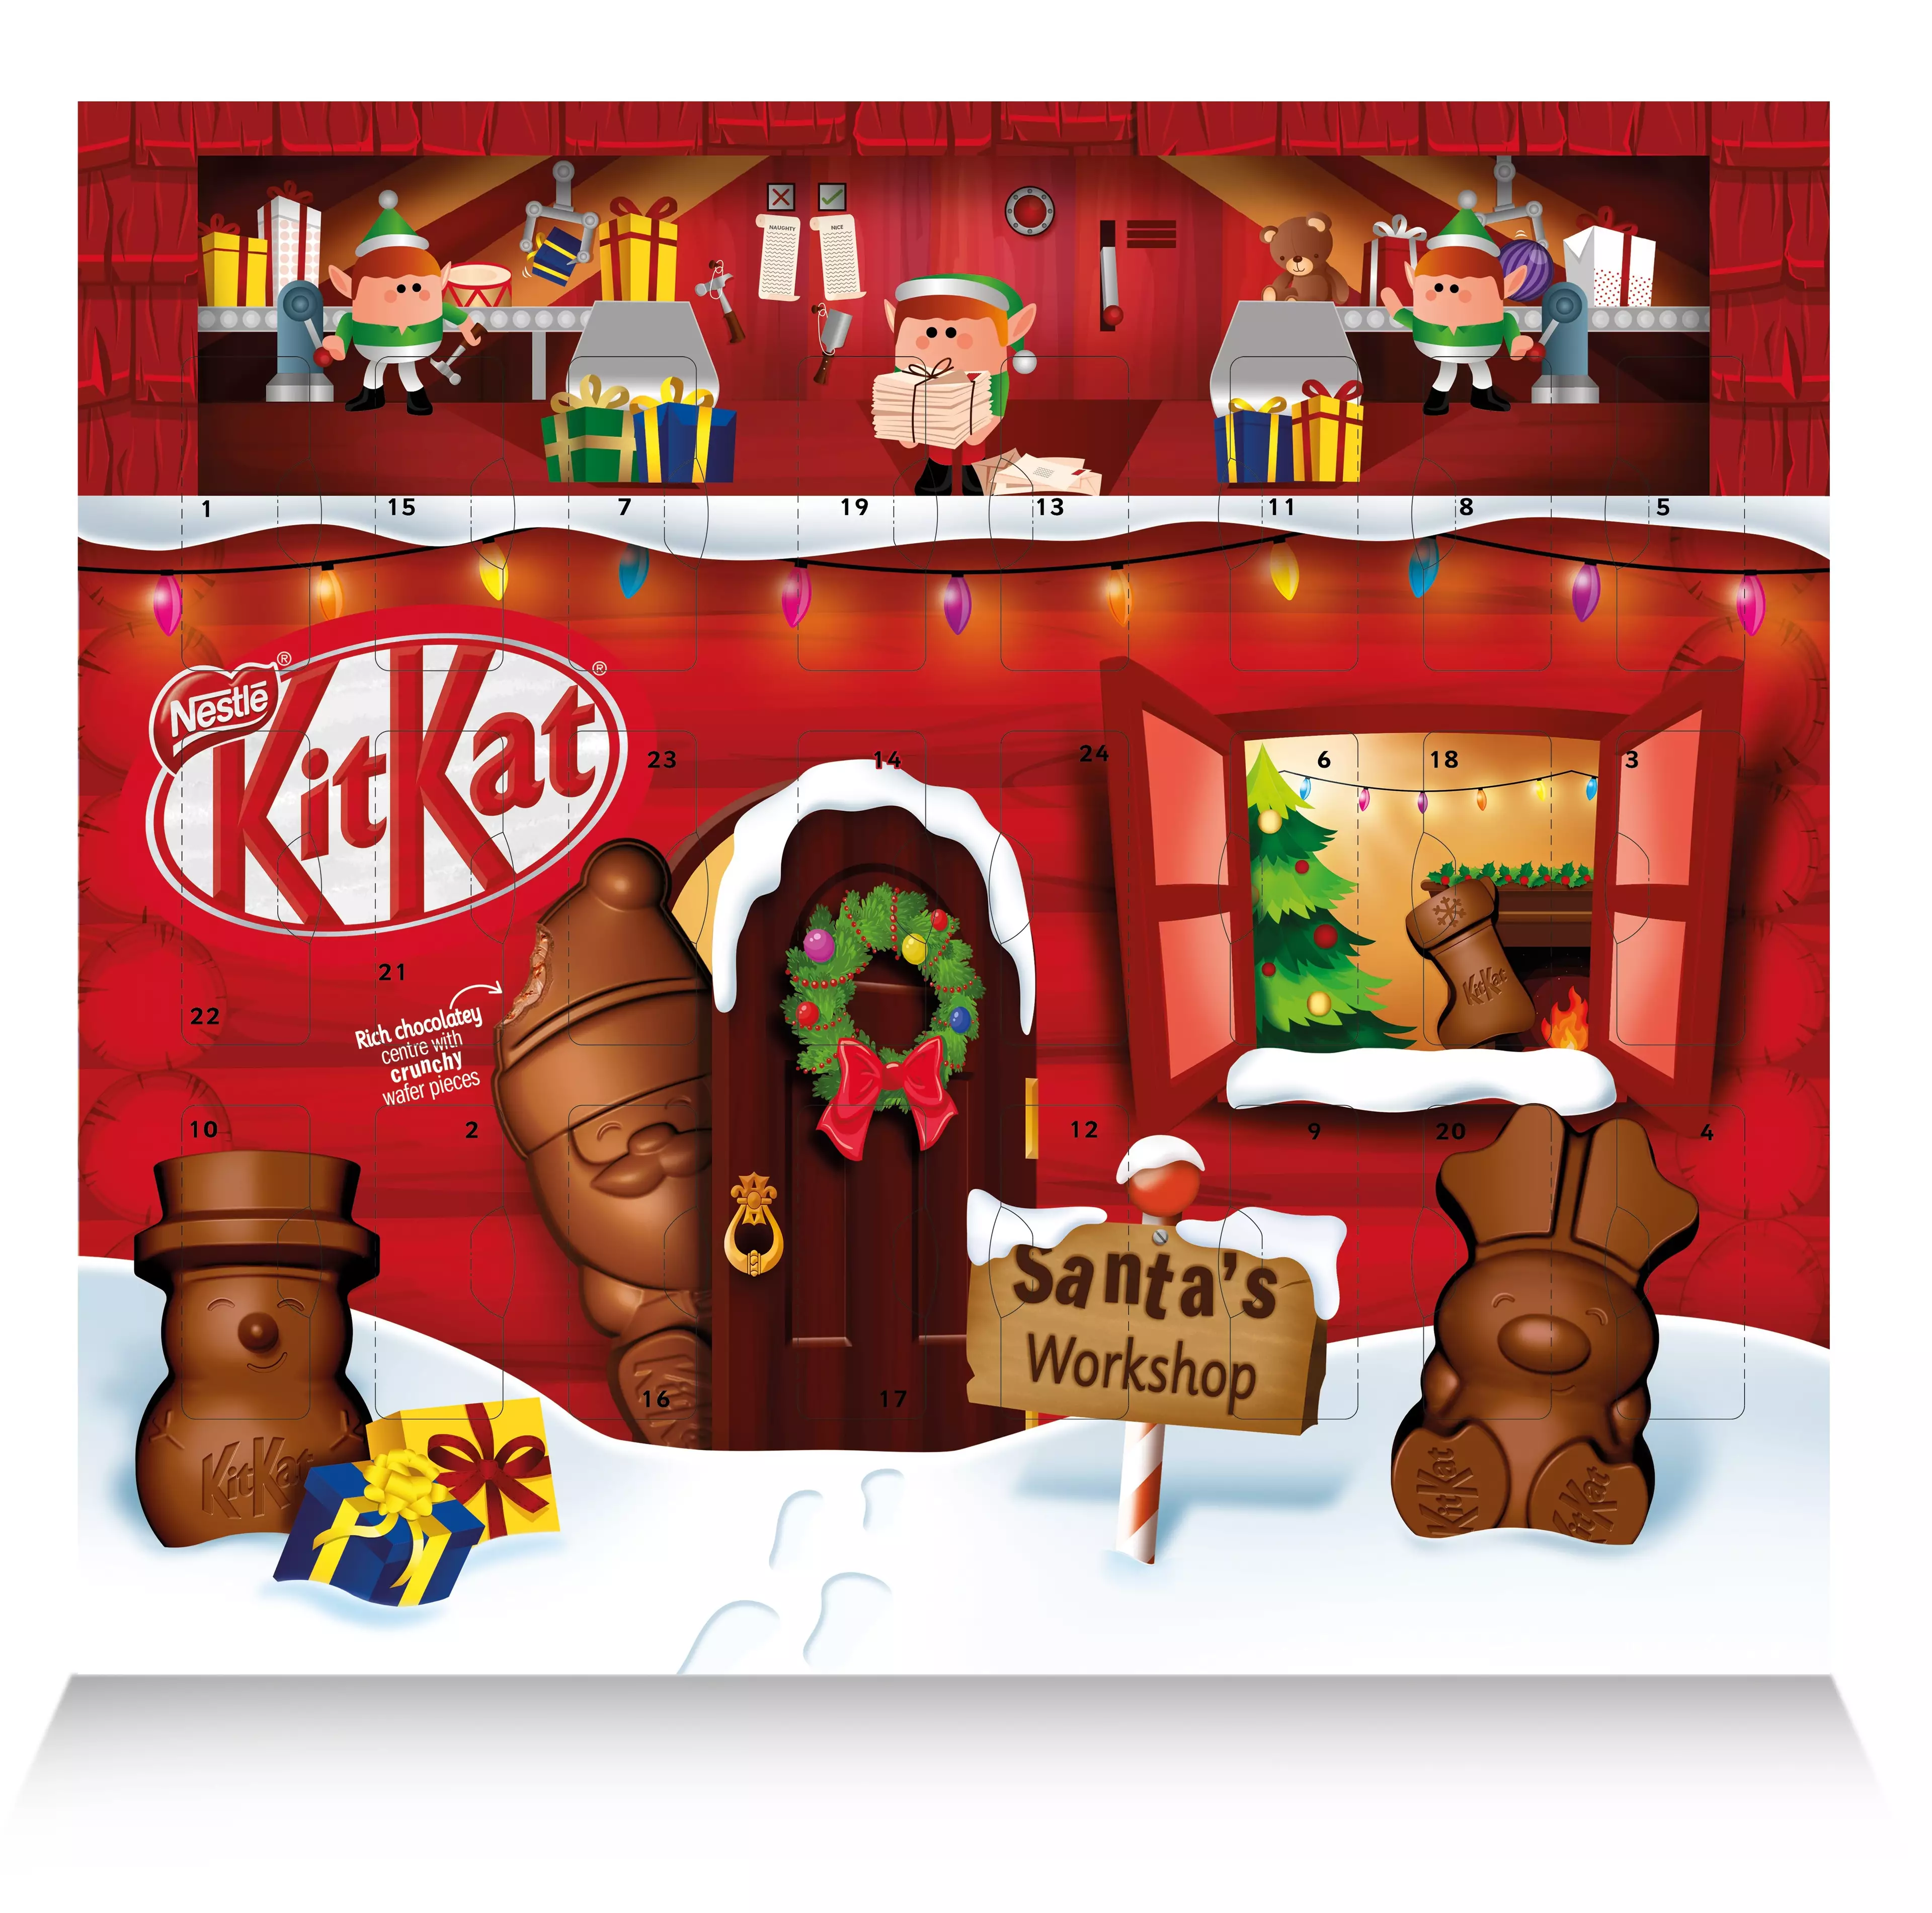 There's also a KitKat Santa advent calendar (